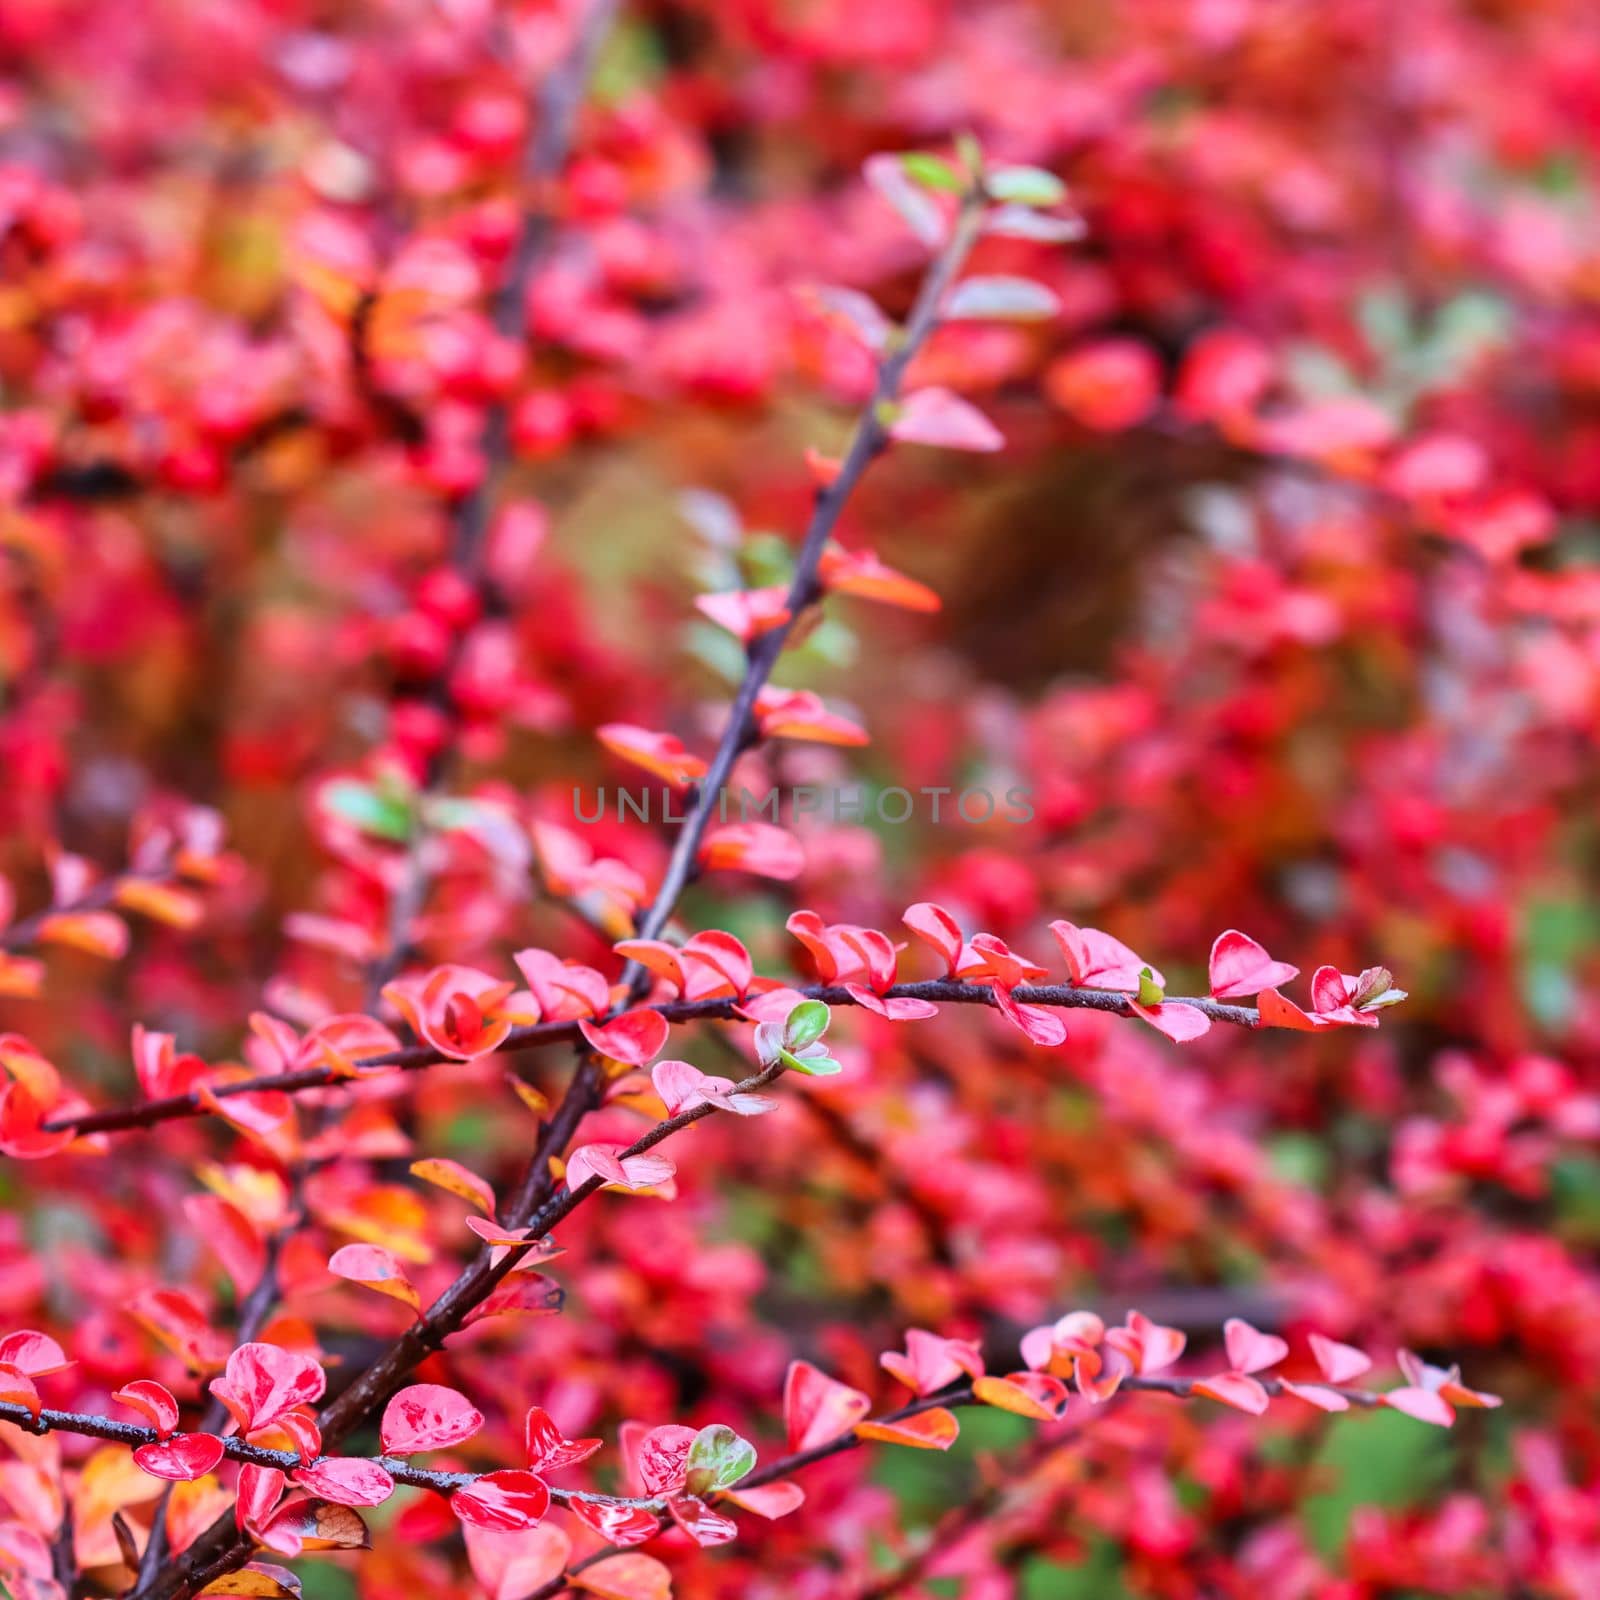 Blurred autumn background. Red leaves and fruits on the cotoneaster branches by Olayola